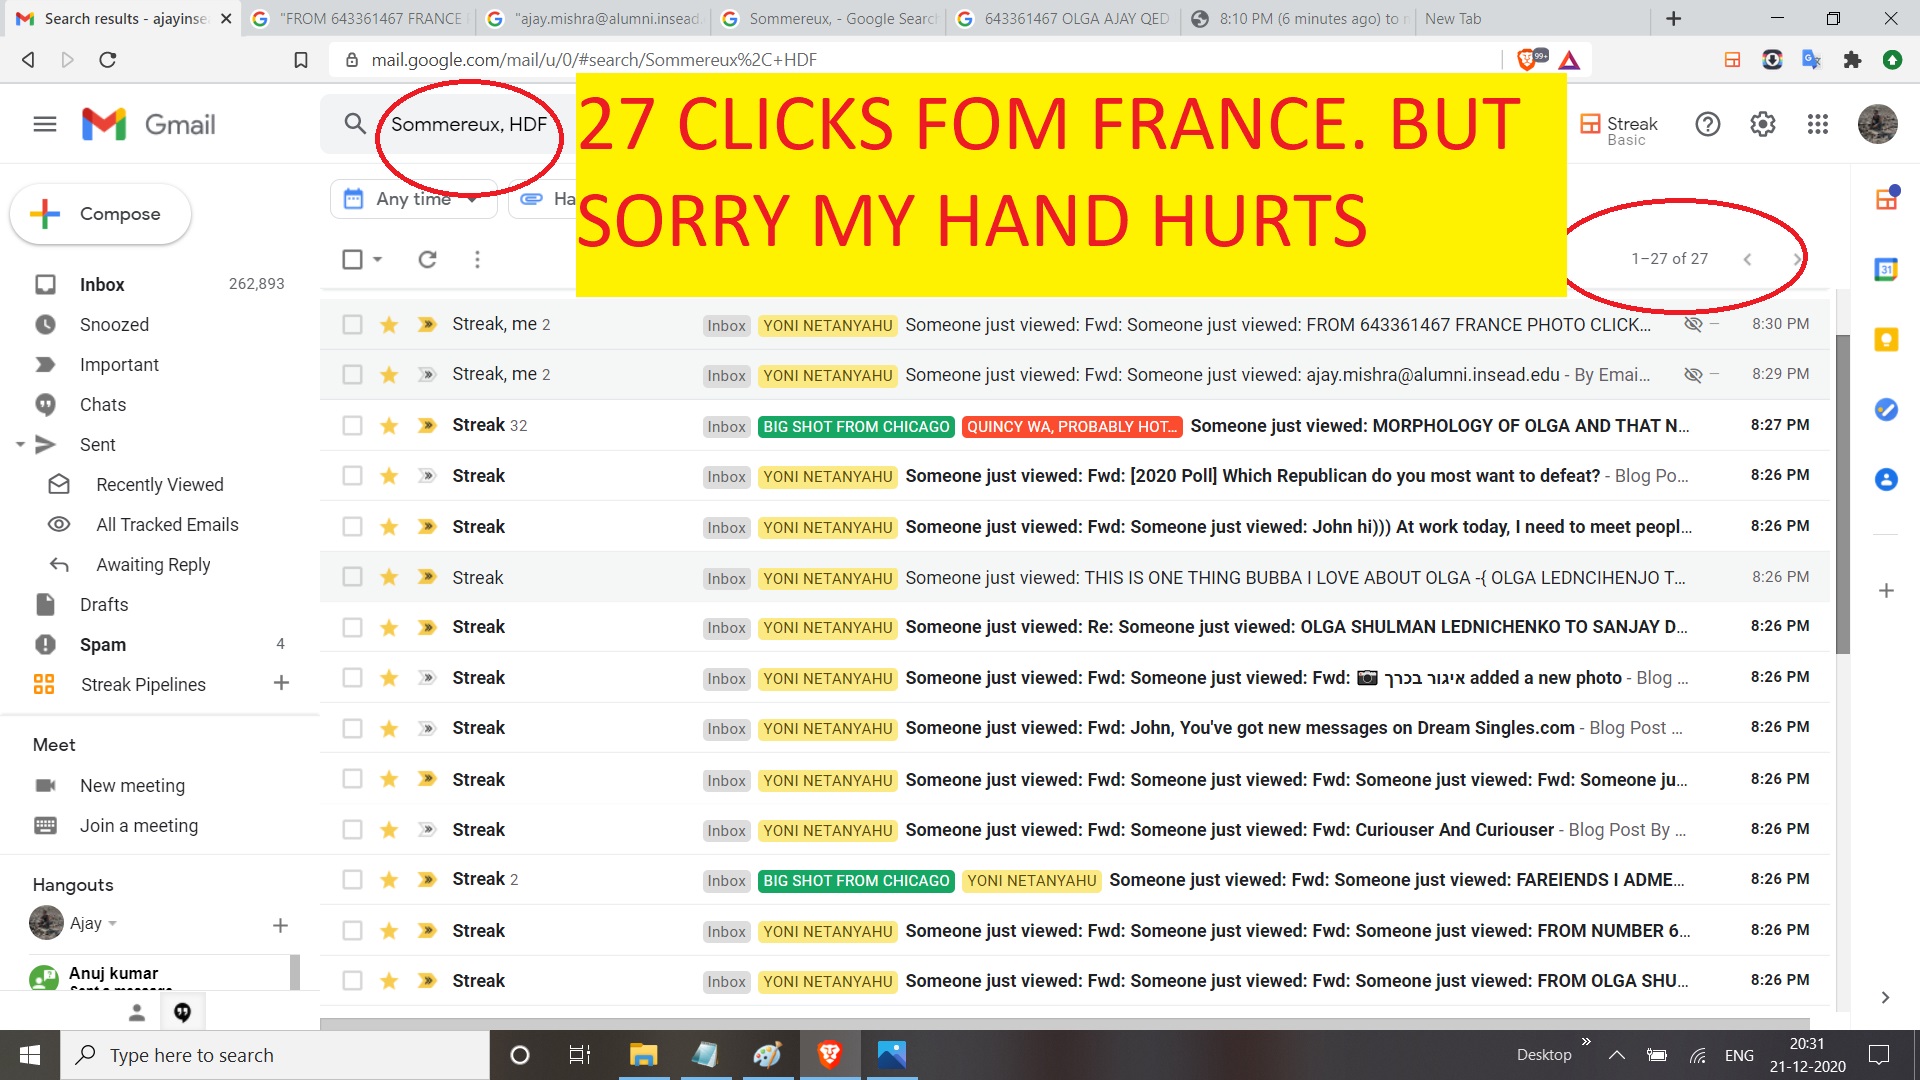 27 CLICKS FOM FRANCE. BUT SORRY MY HAND HURTS